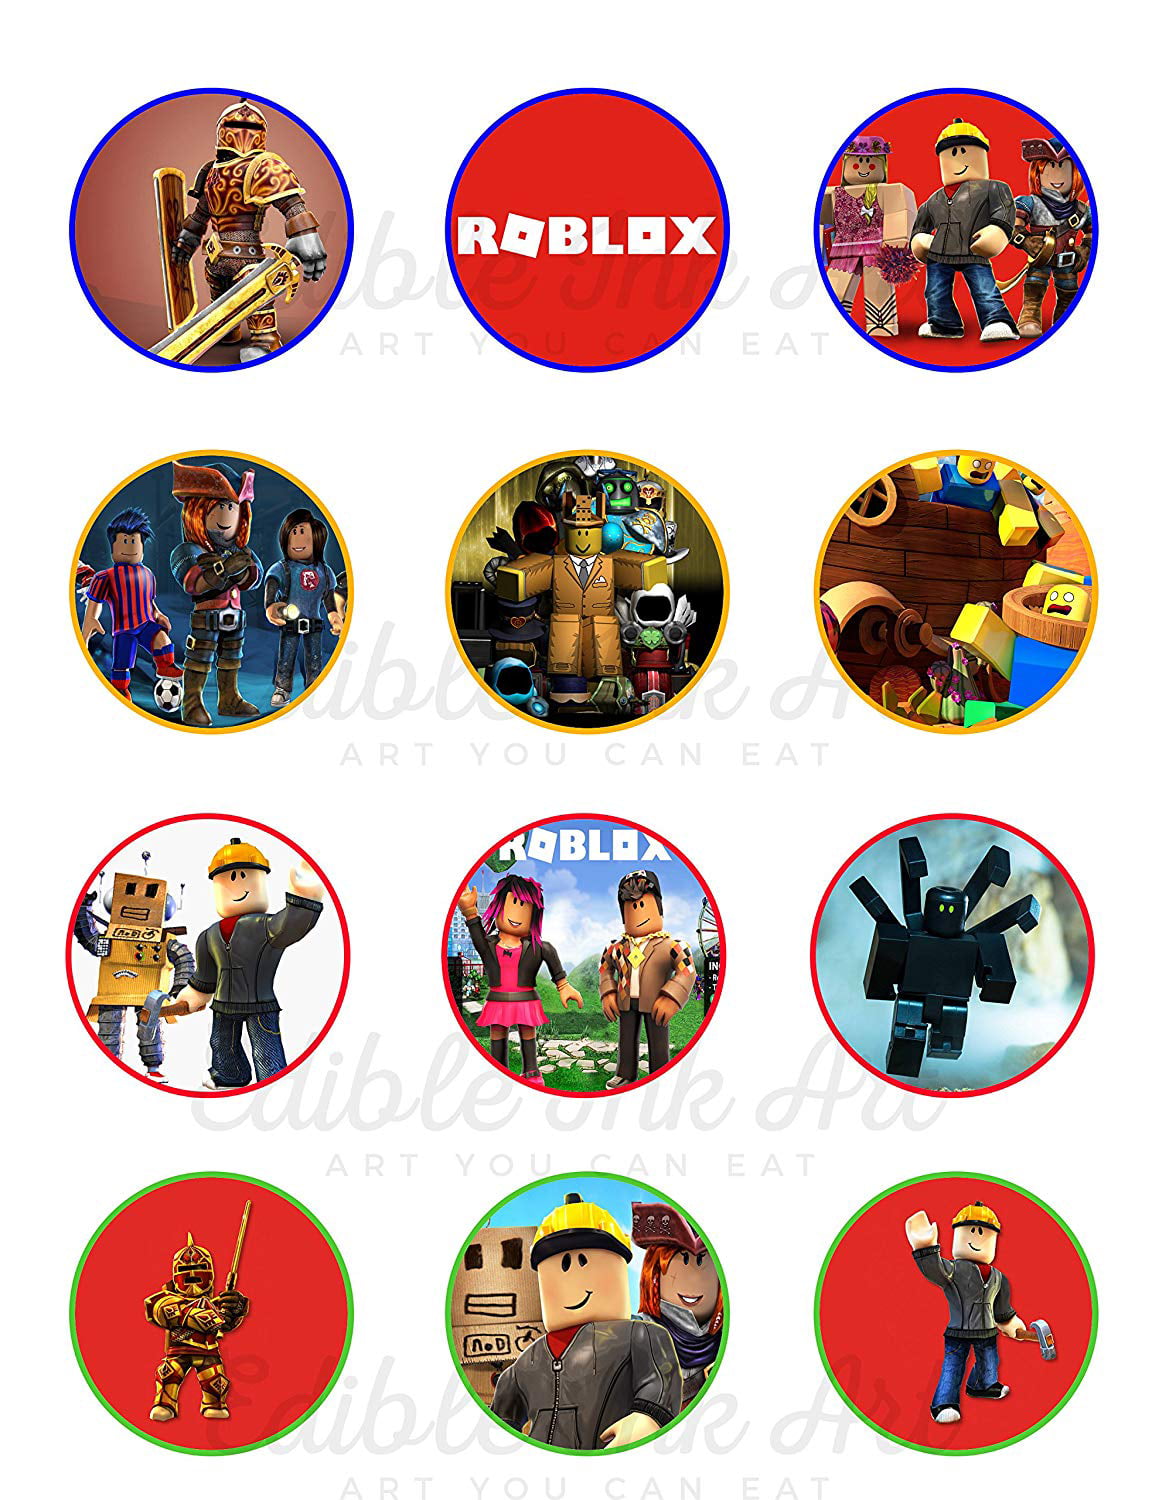 Details about   12 PCS Roblox Birthday CupCake Party Toppers Cake Decorations Flags Picks